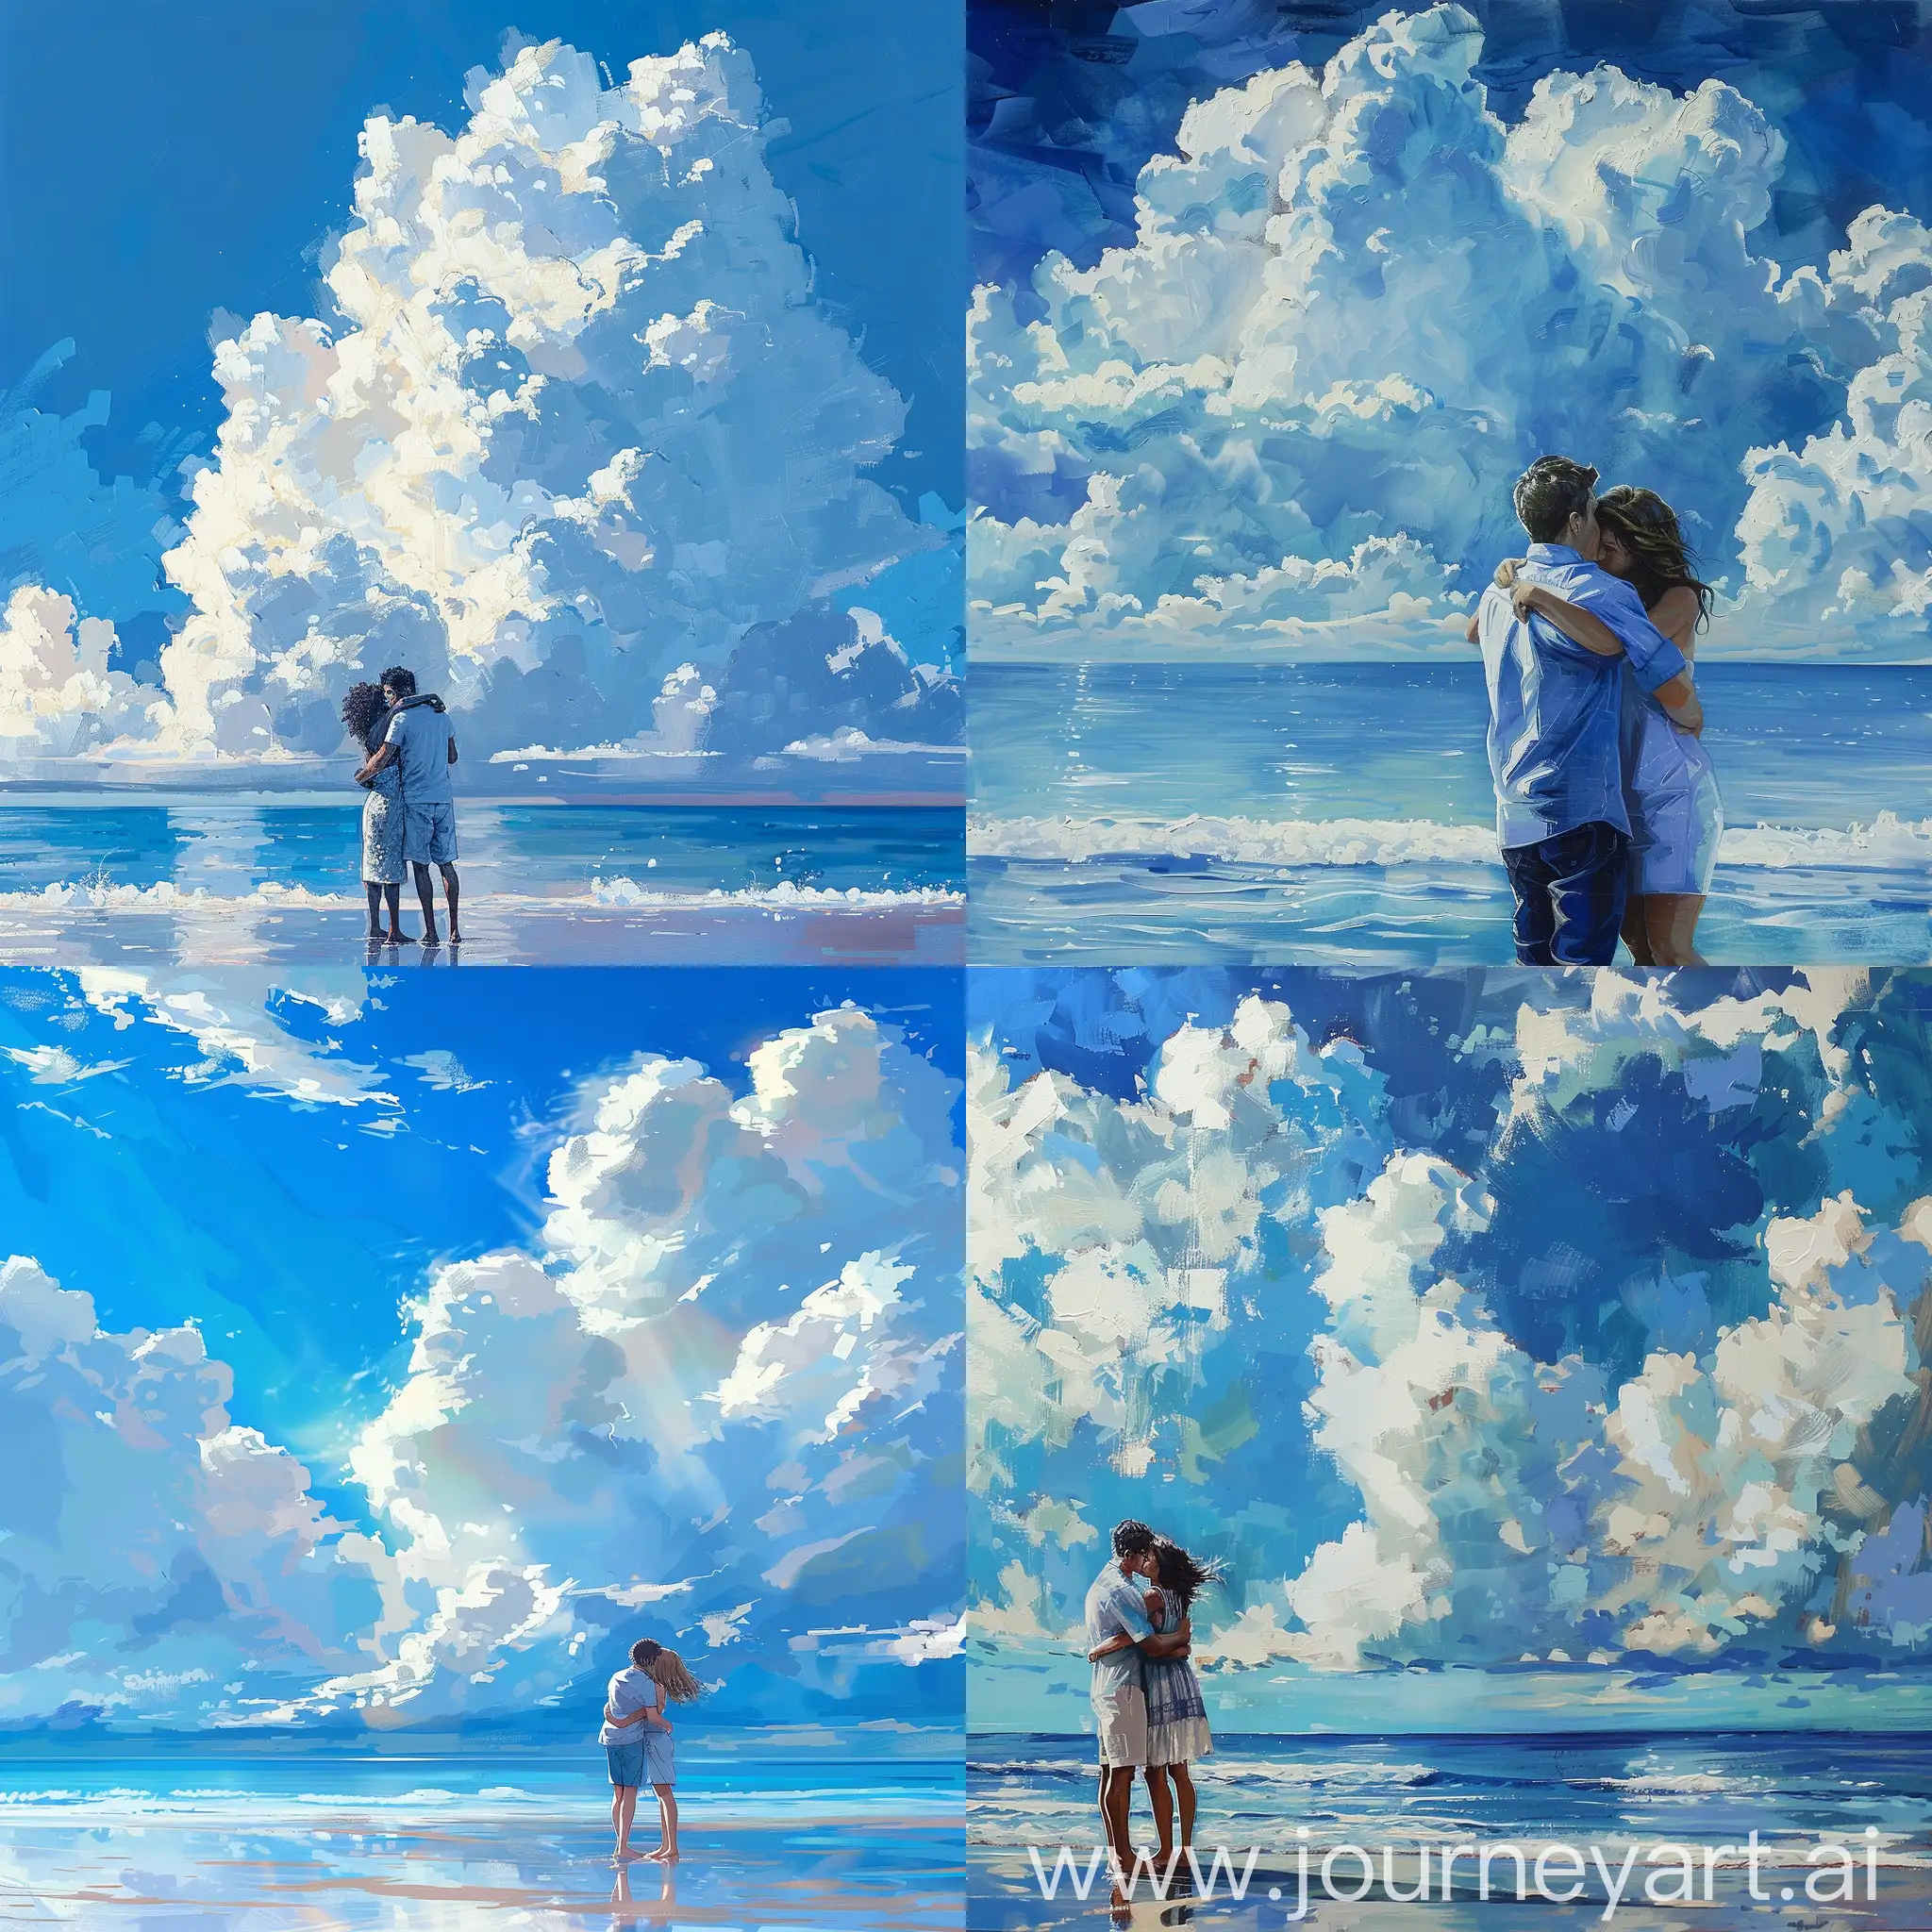 Couple-Hugging-by-the-Sea-under-Blue-Sky-and-White-Clouds